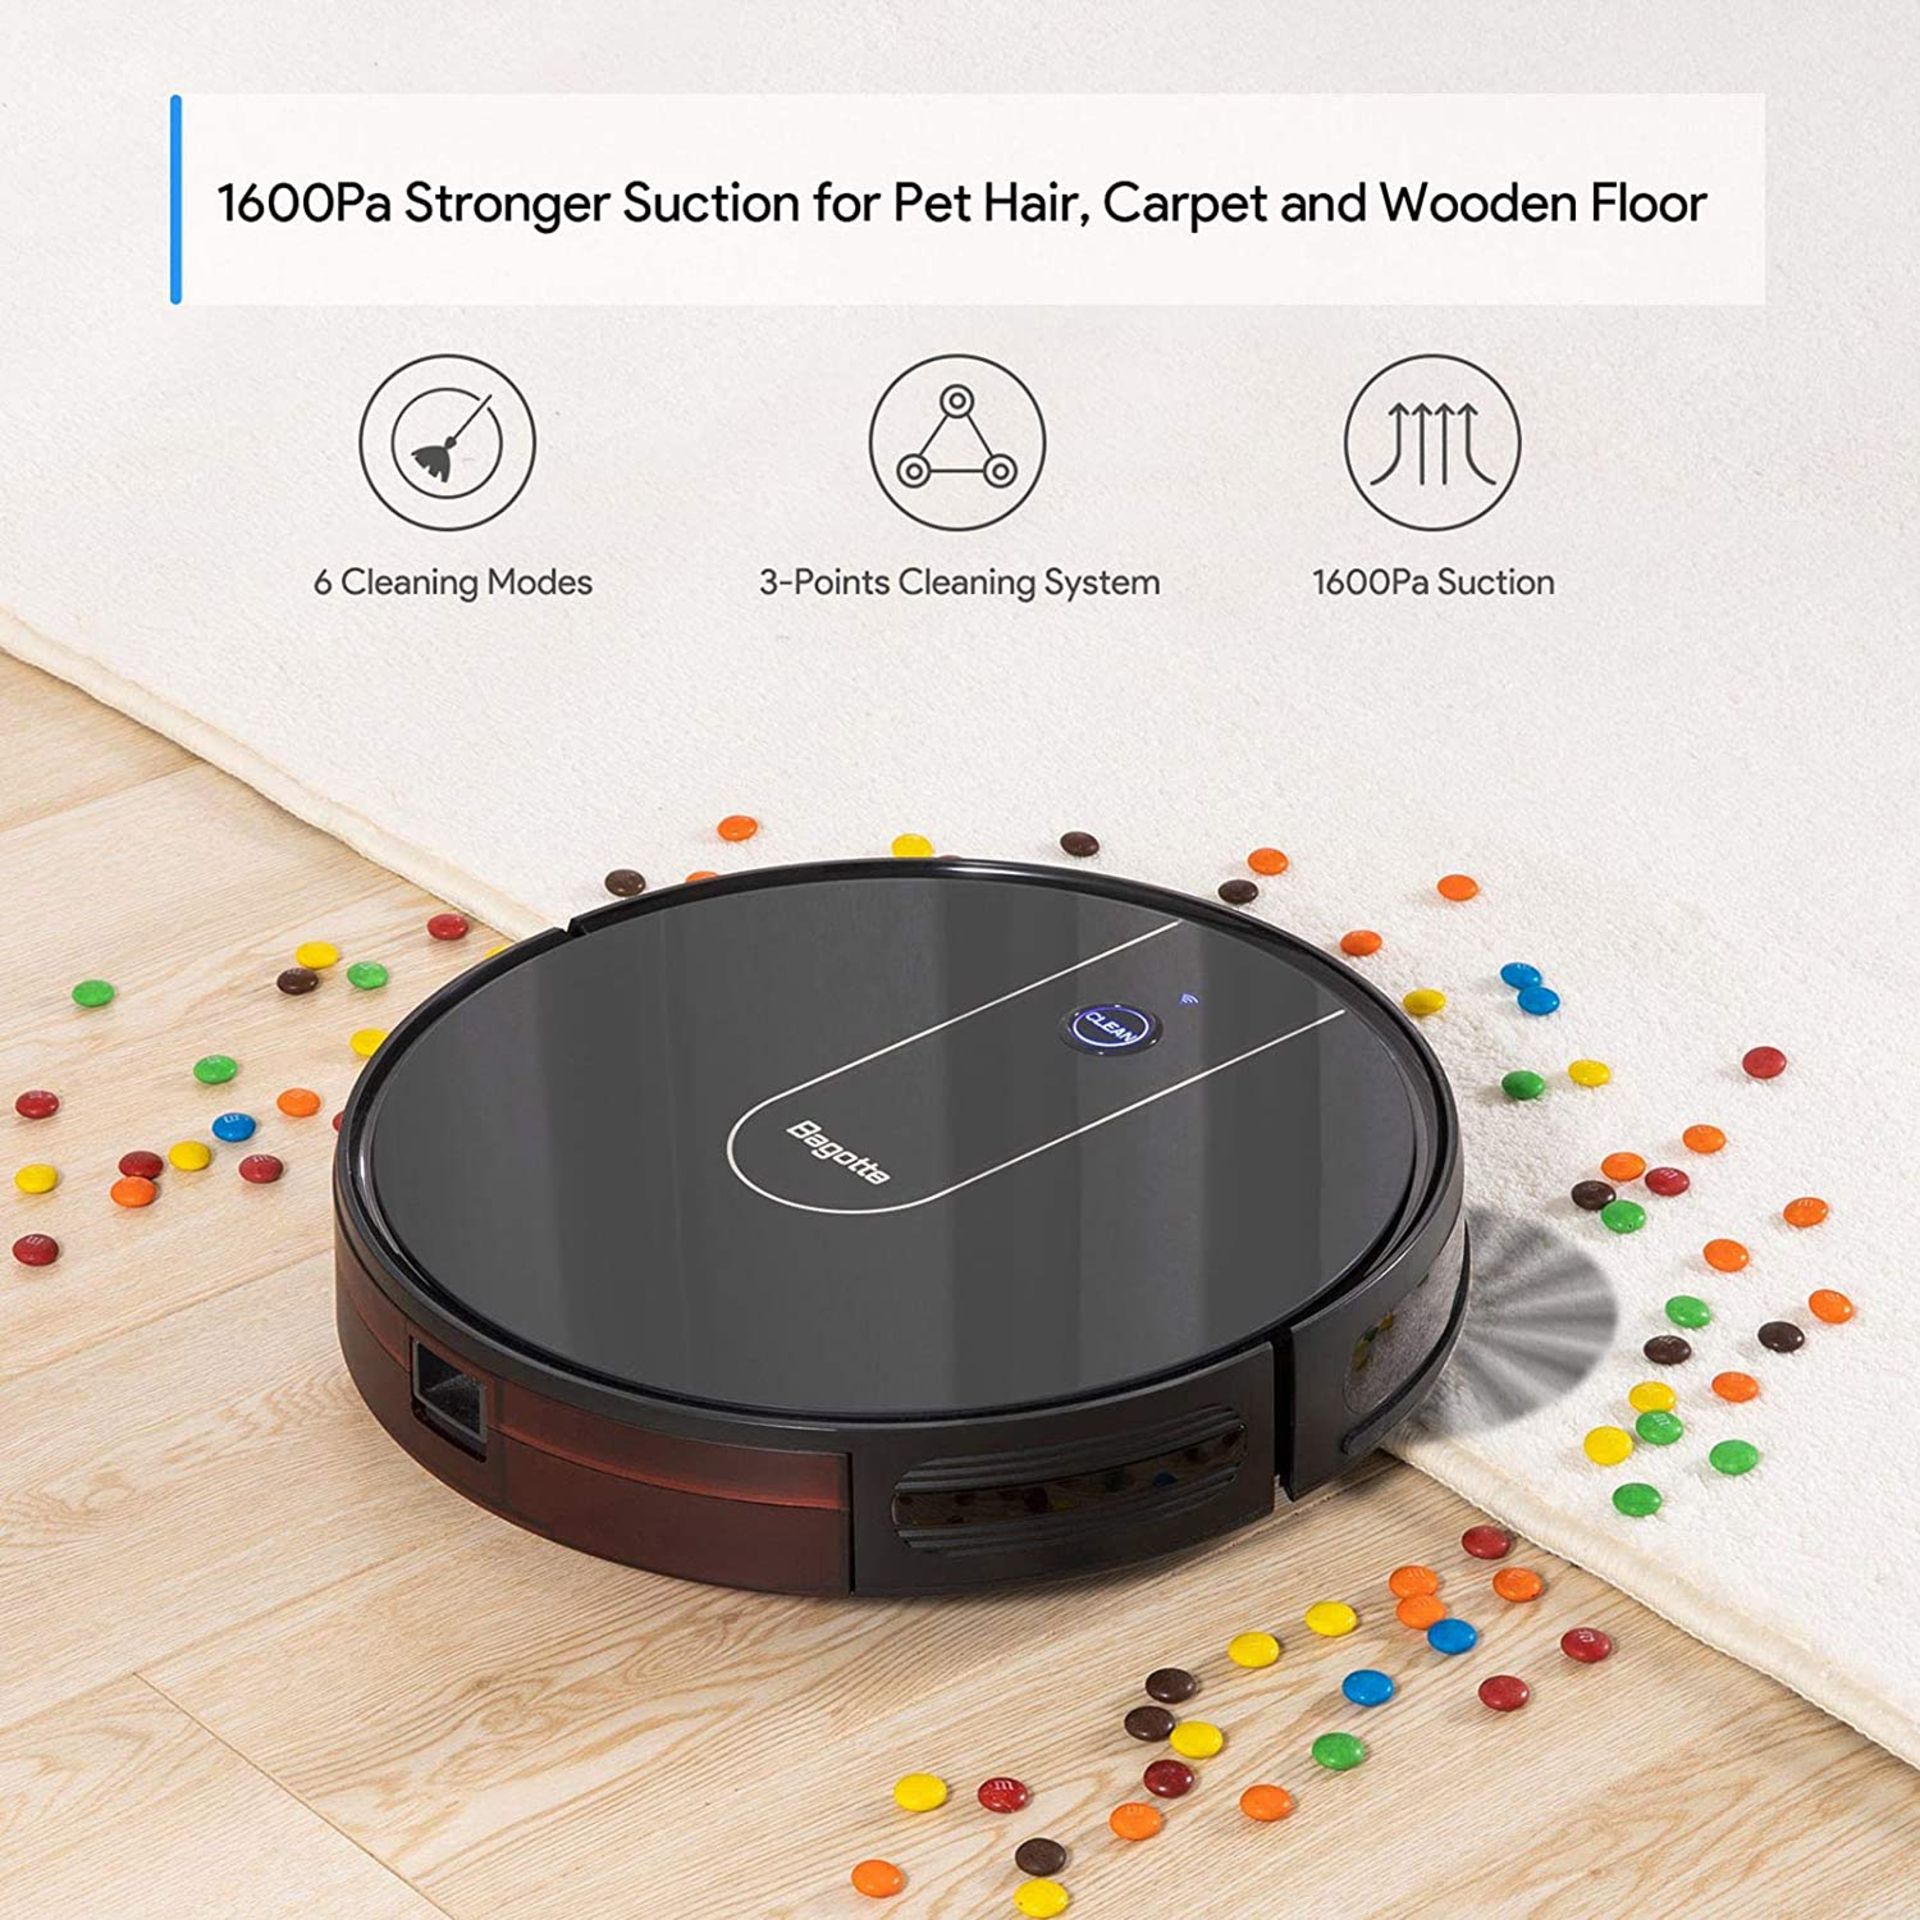 Bagotte BG700 Wi-Fi Robot Vacuum with mop - 2.7" Thin, Strong Suction, Work with Alexa - Image 5 of 8